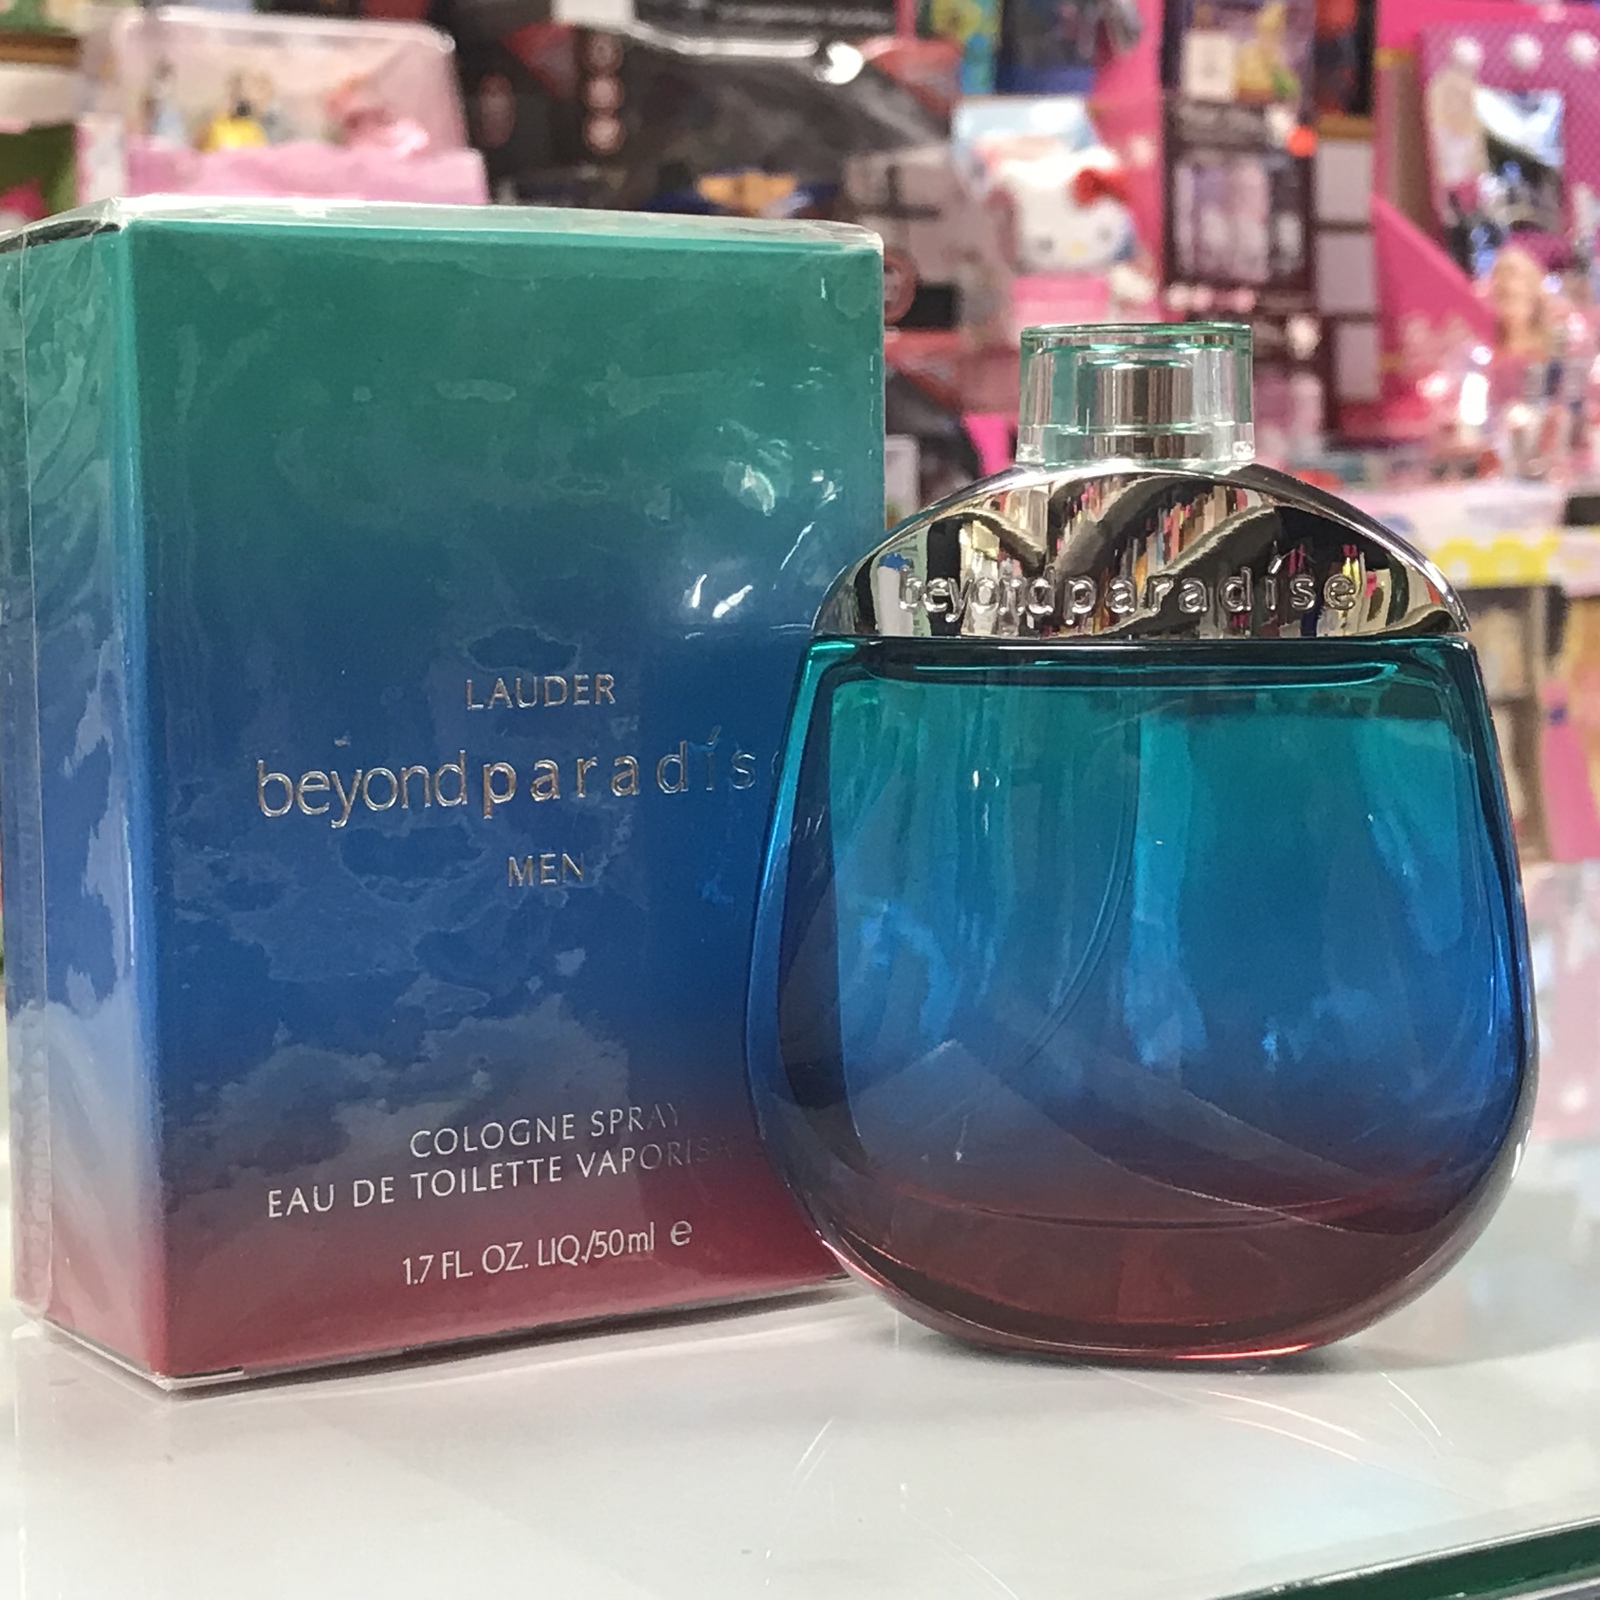 Beyond Paradise by Estee Lauder Men, 1.7 and 50 similar items